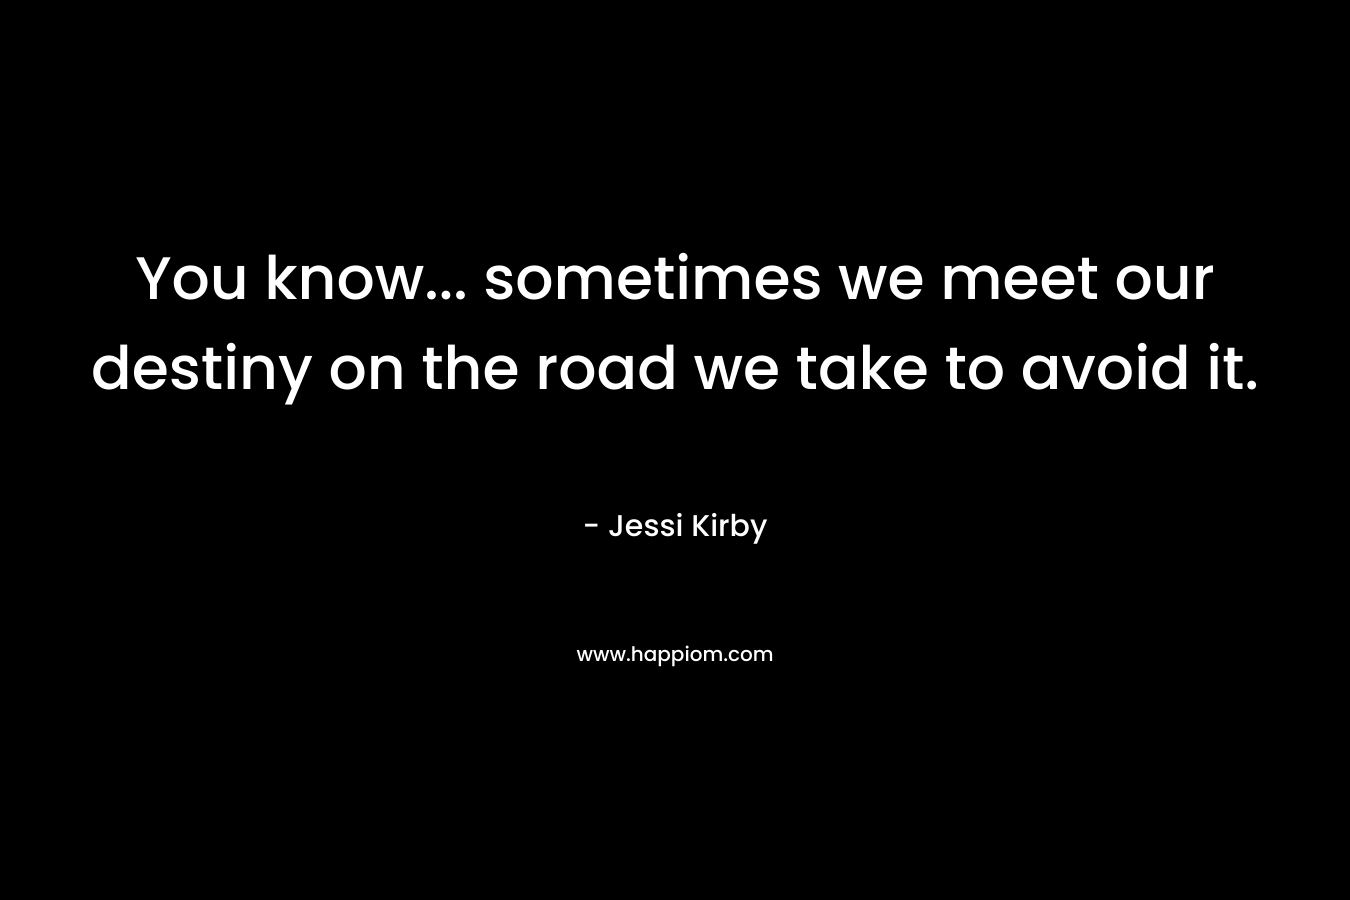 You know… sometimes we meet our destiny on the road we take to avoid it. – Jessi Kirby